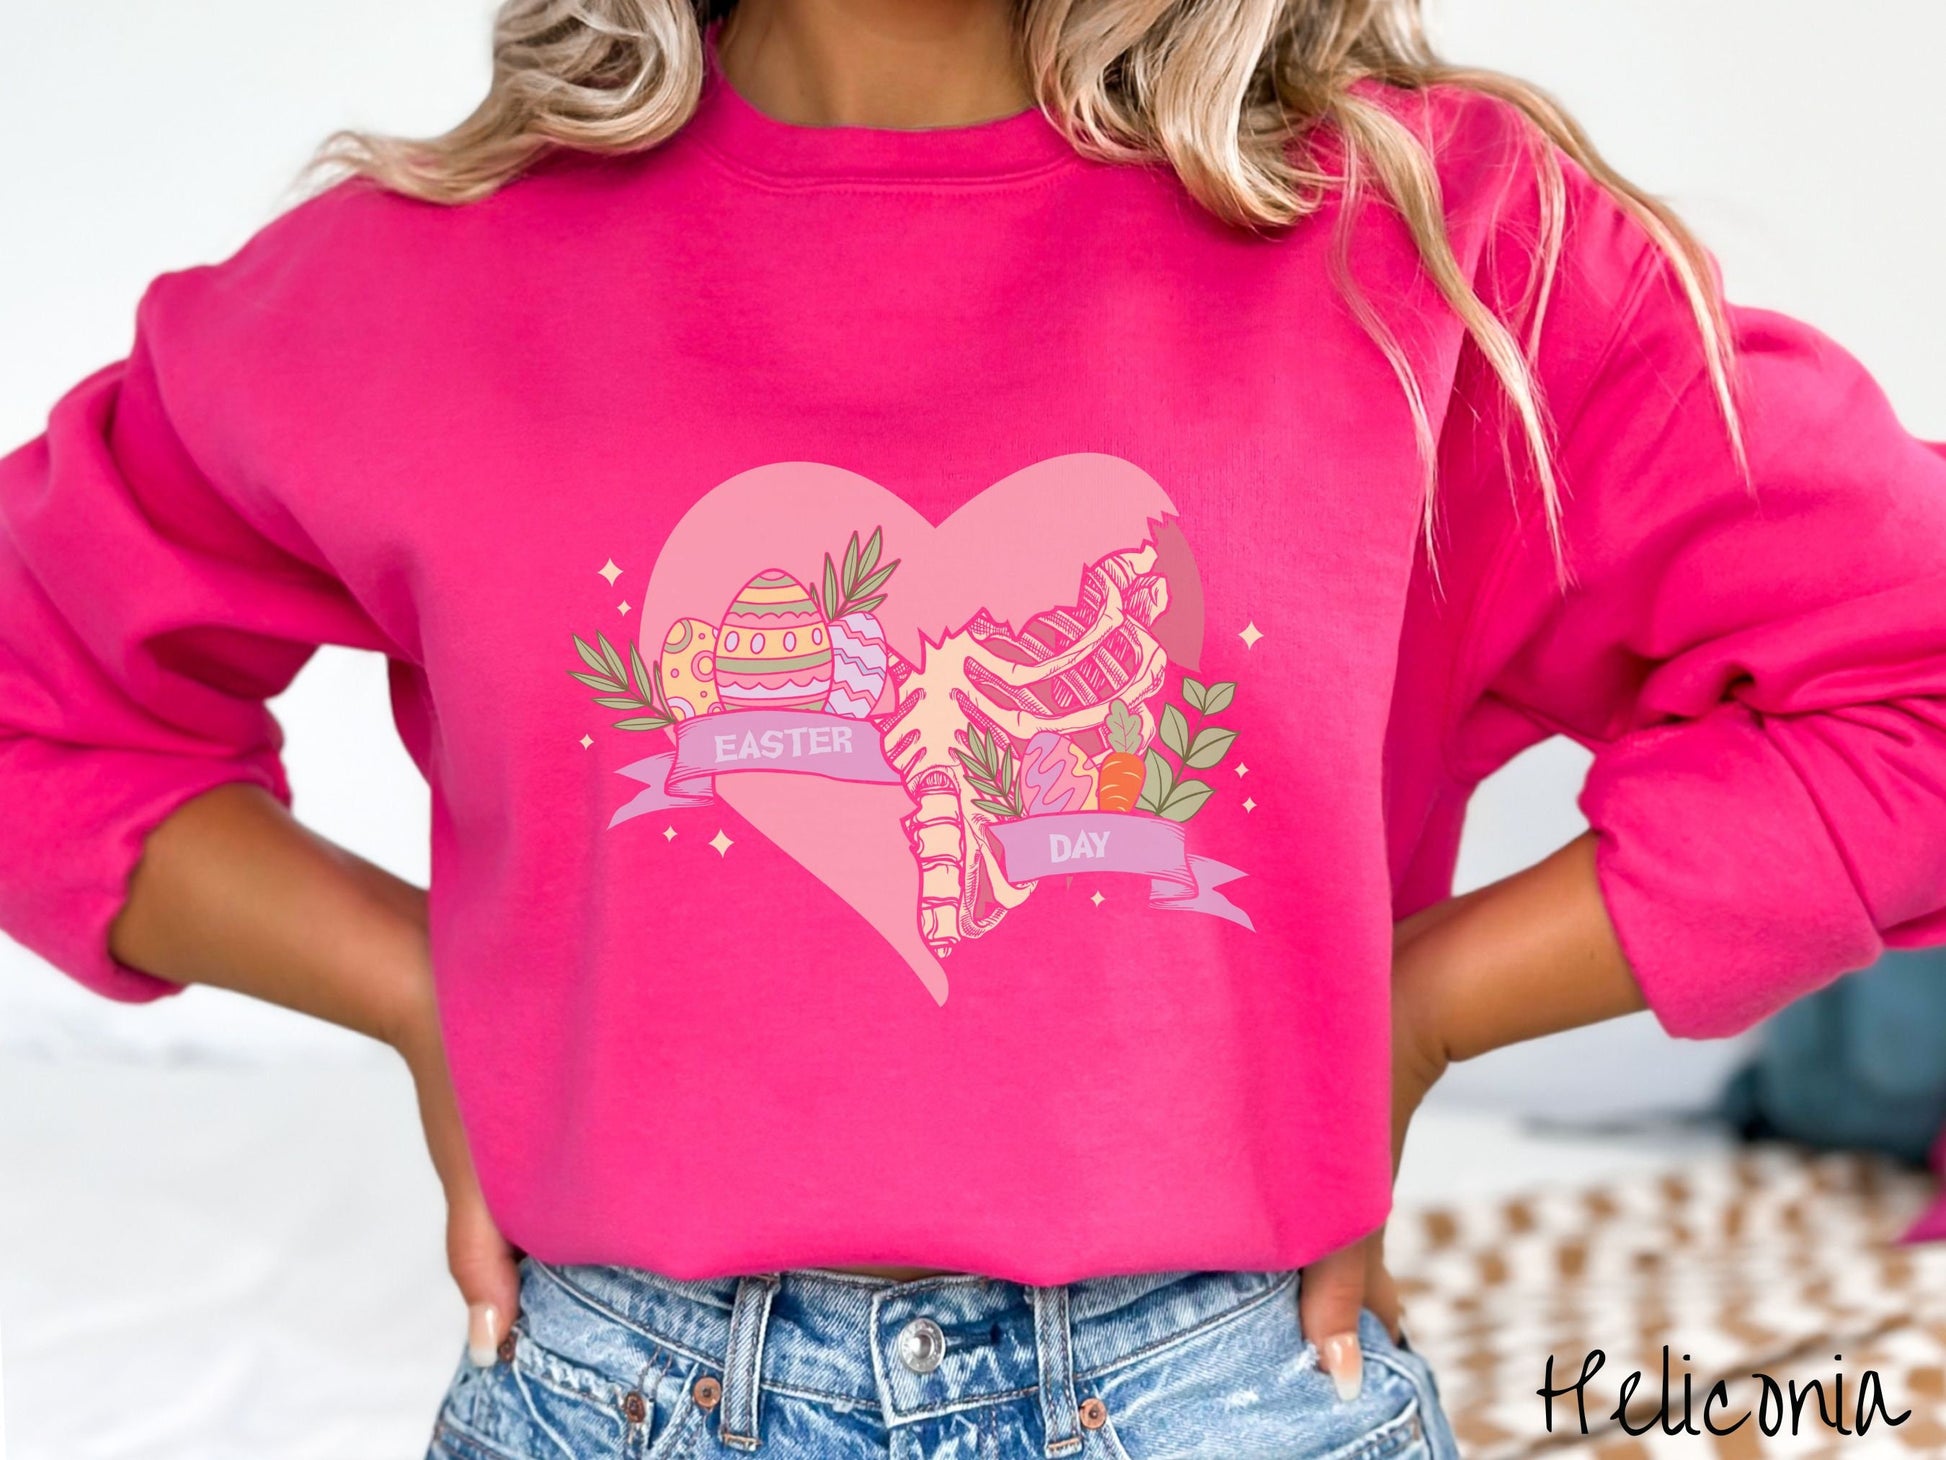 A woman wearing a cute, vintage heliconia colored sweatshirt with a pink heart that is cracking and underneath is a skeleton rib cage. There is a pink banner across the heart that says Easter Day, and above that are colorful Easter eggs and leaves.